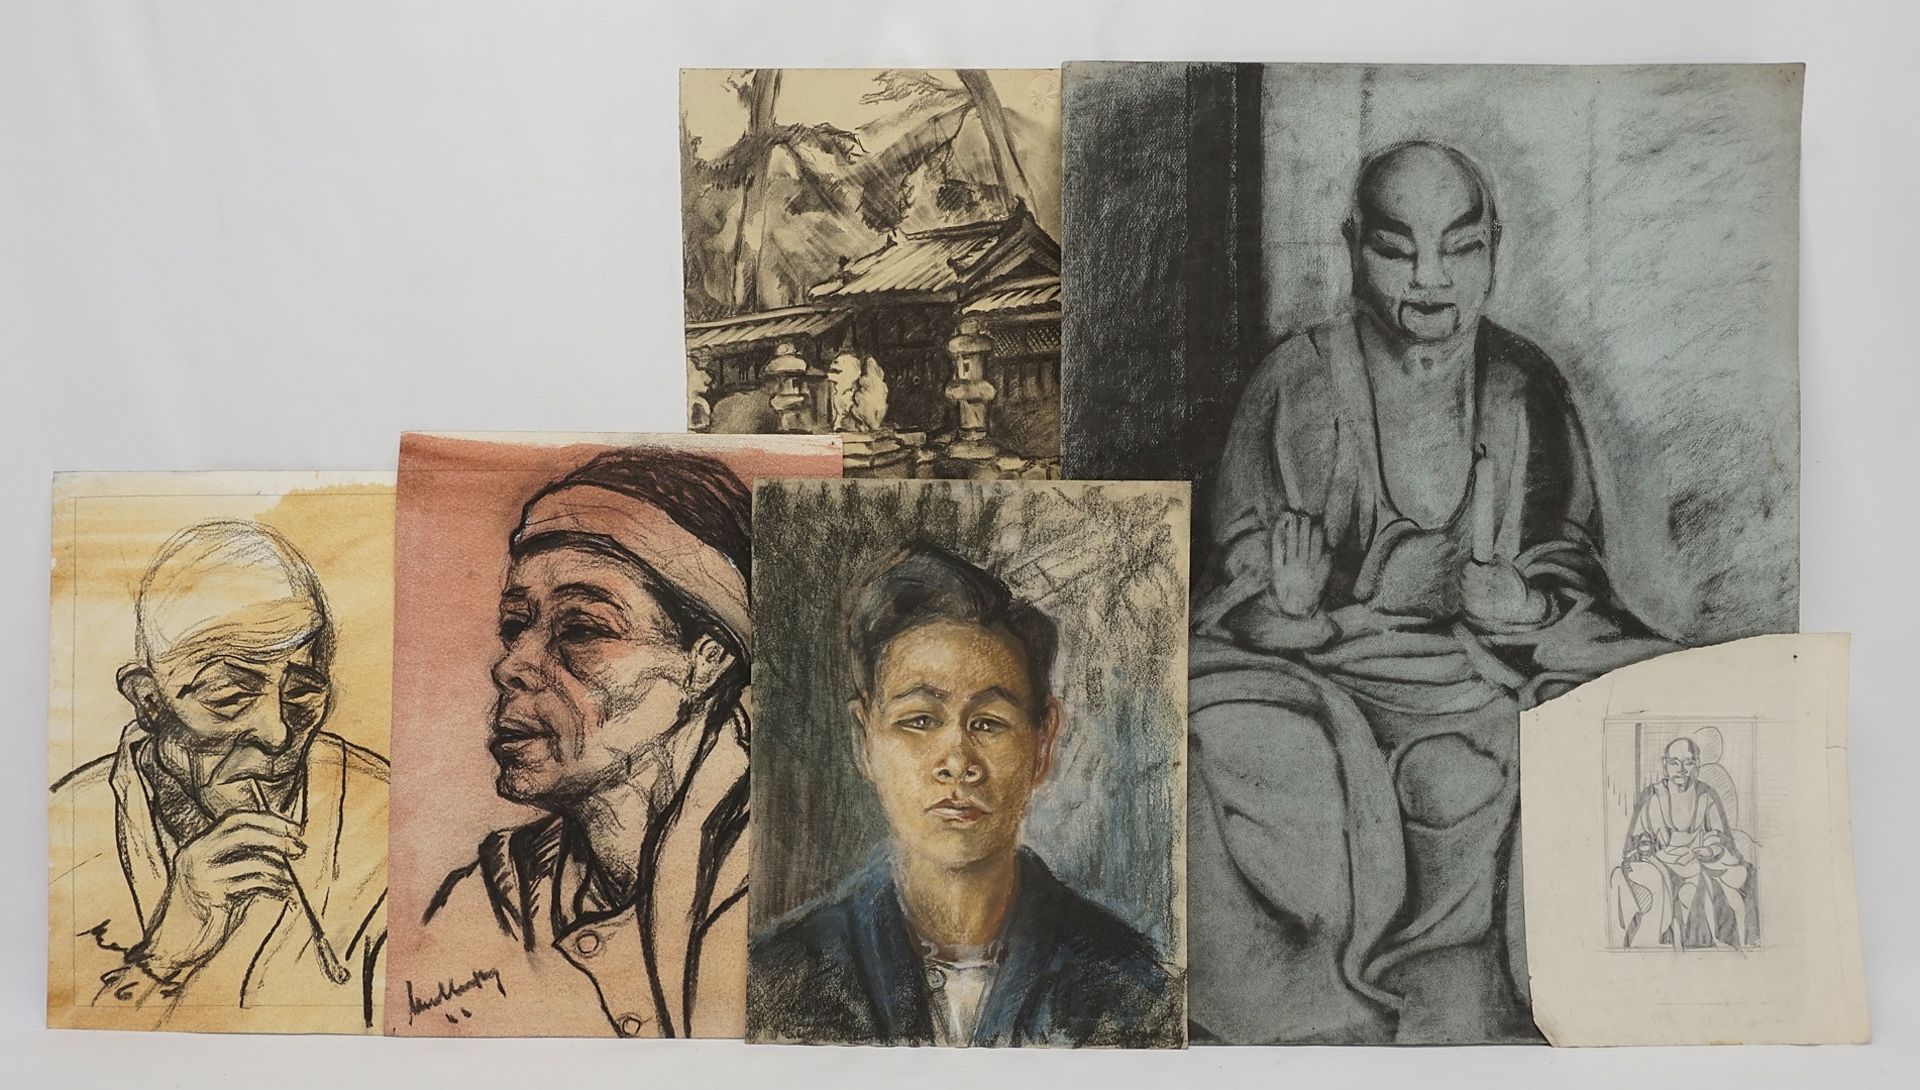 Five charcoal drawings and one preliminary drawing